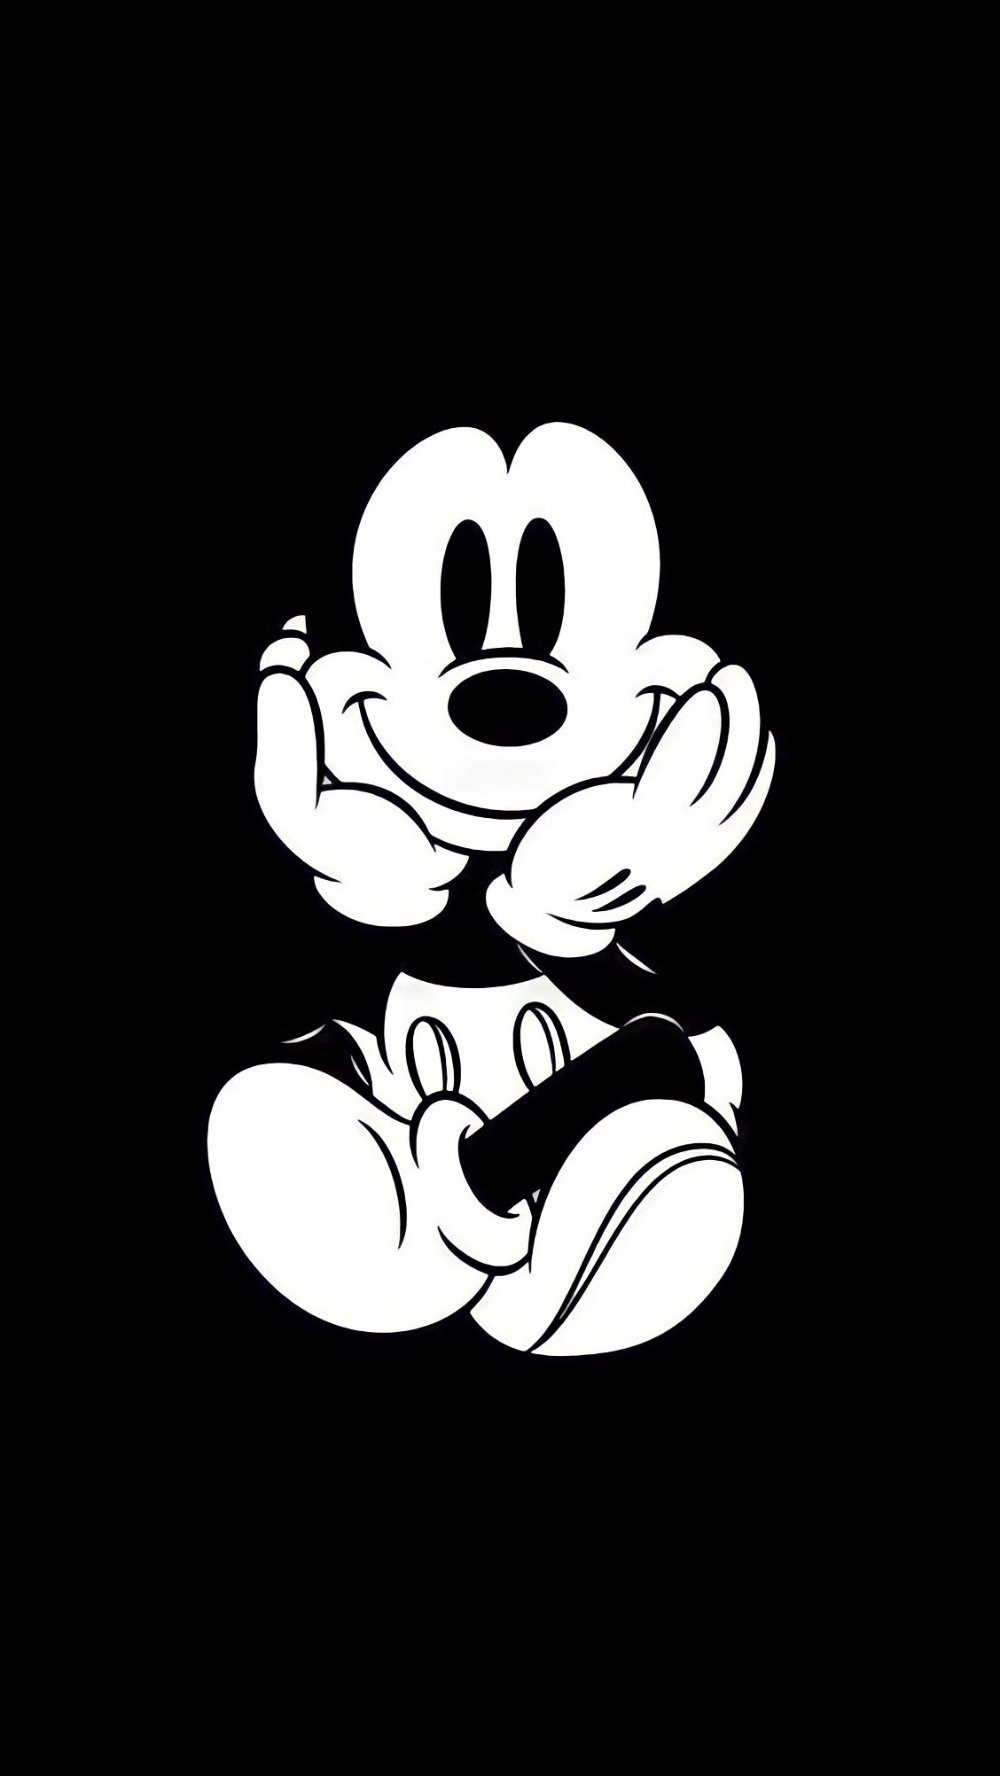 Black and White mickey mouse